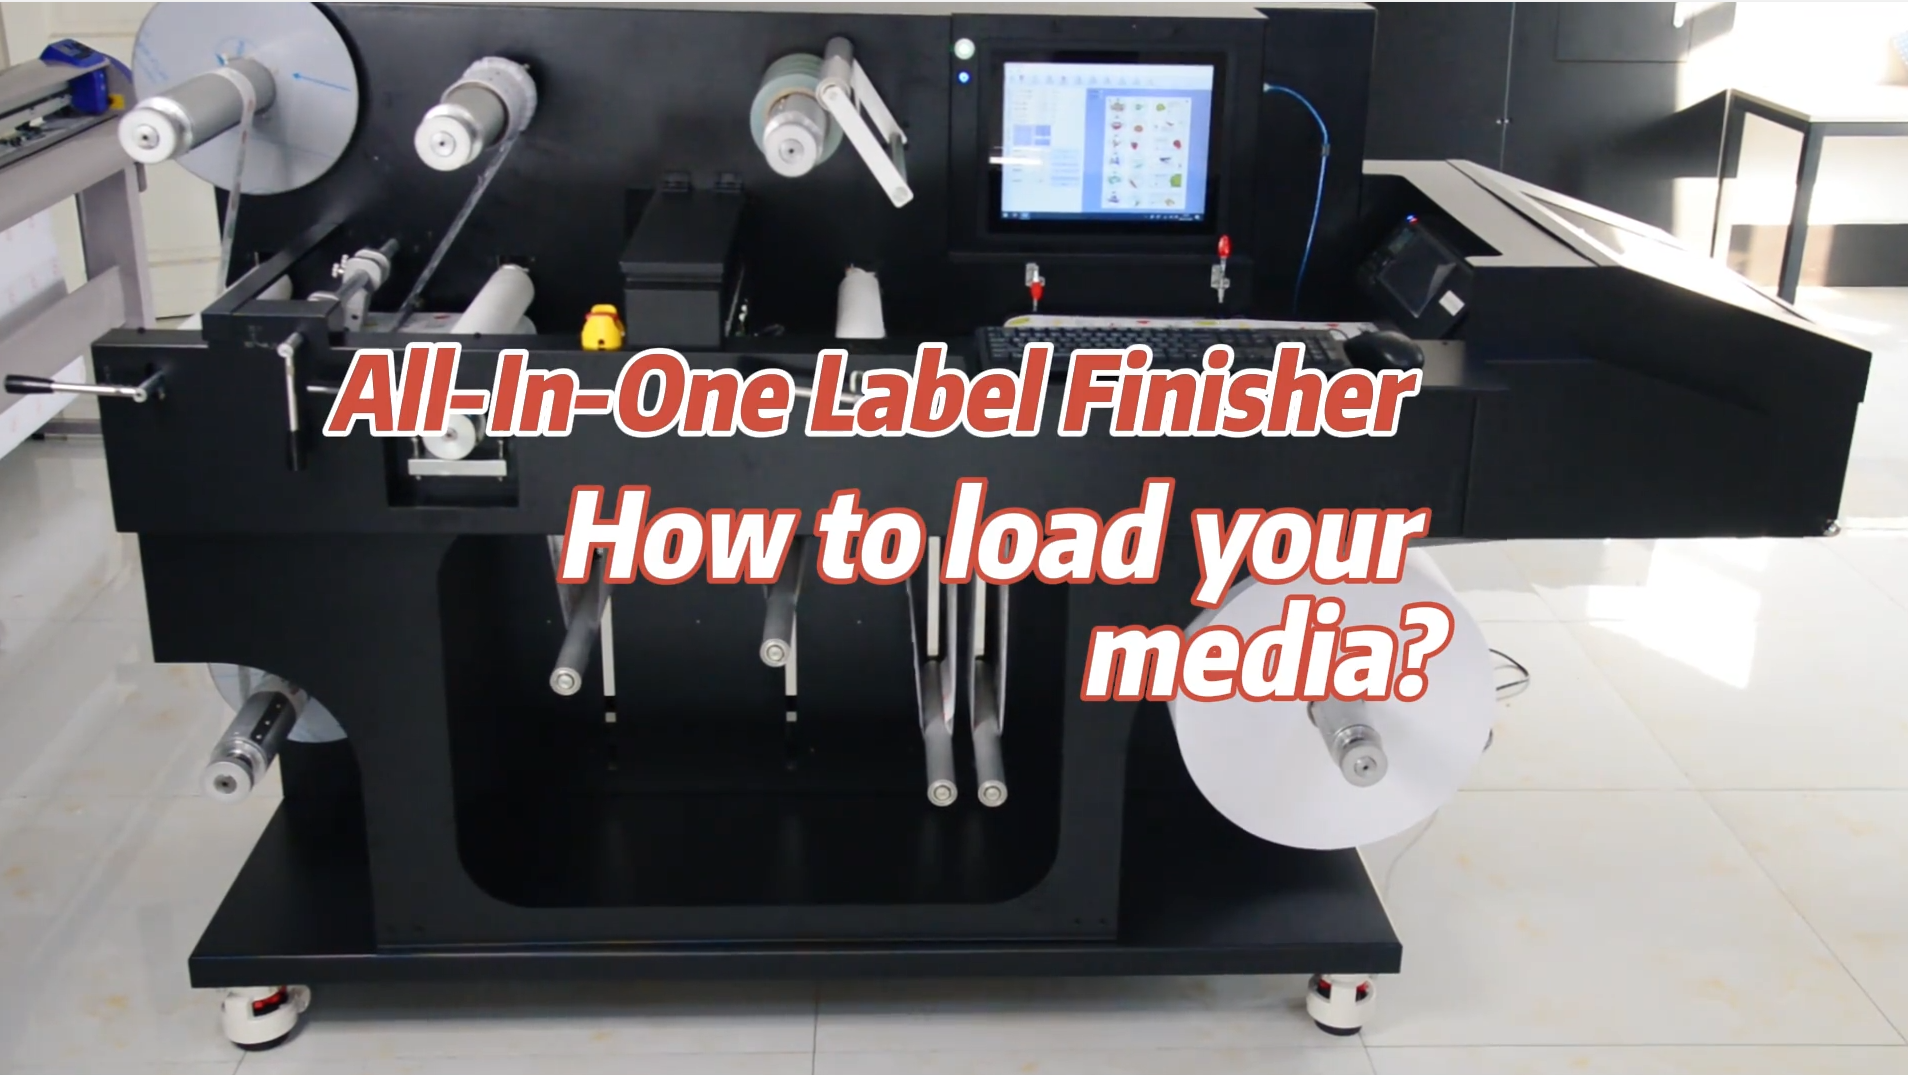 How To Load your media on All in one label Finisher SALF-350?